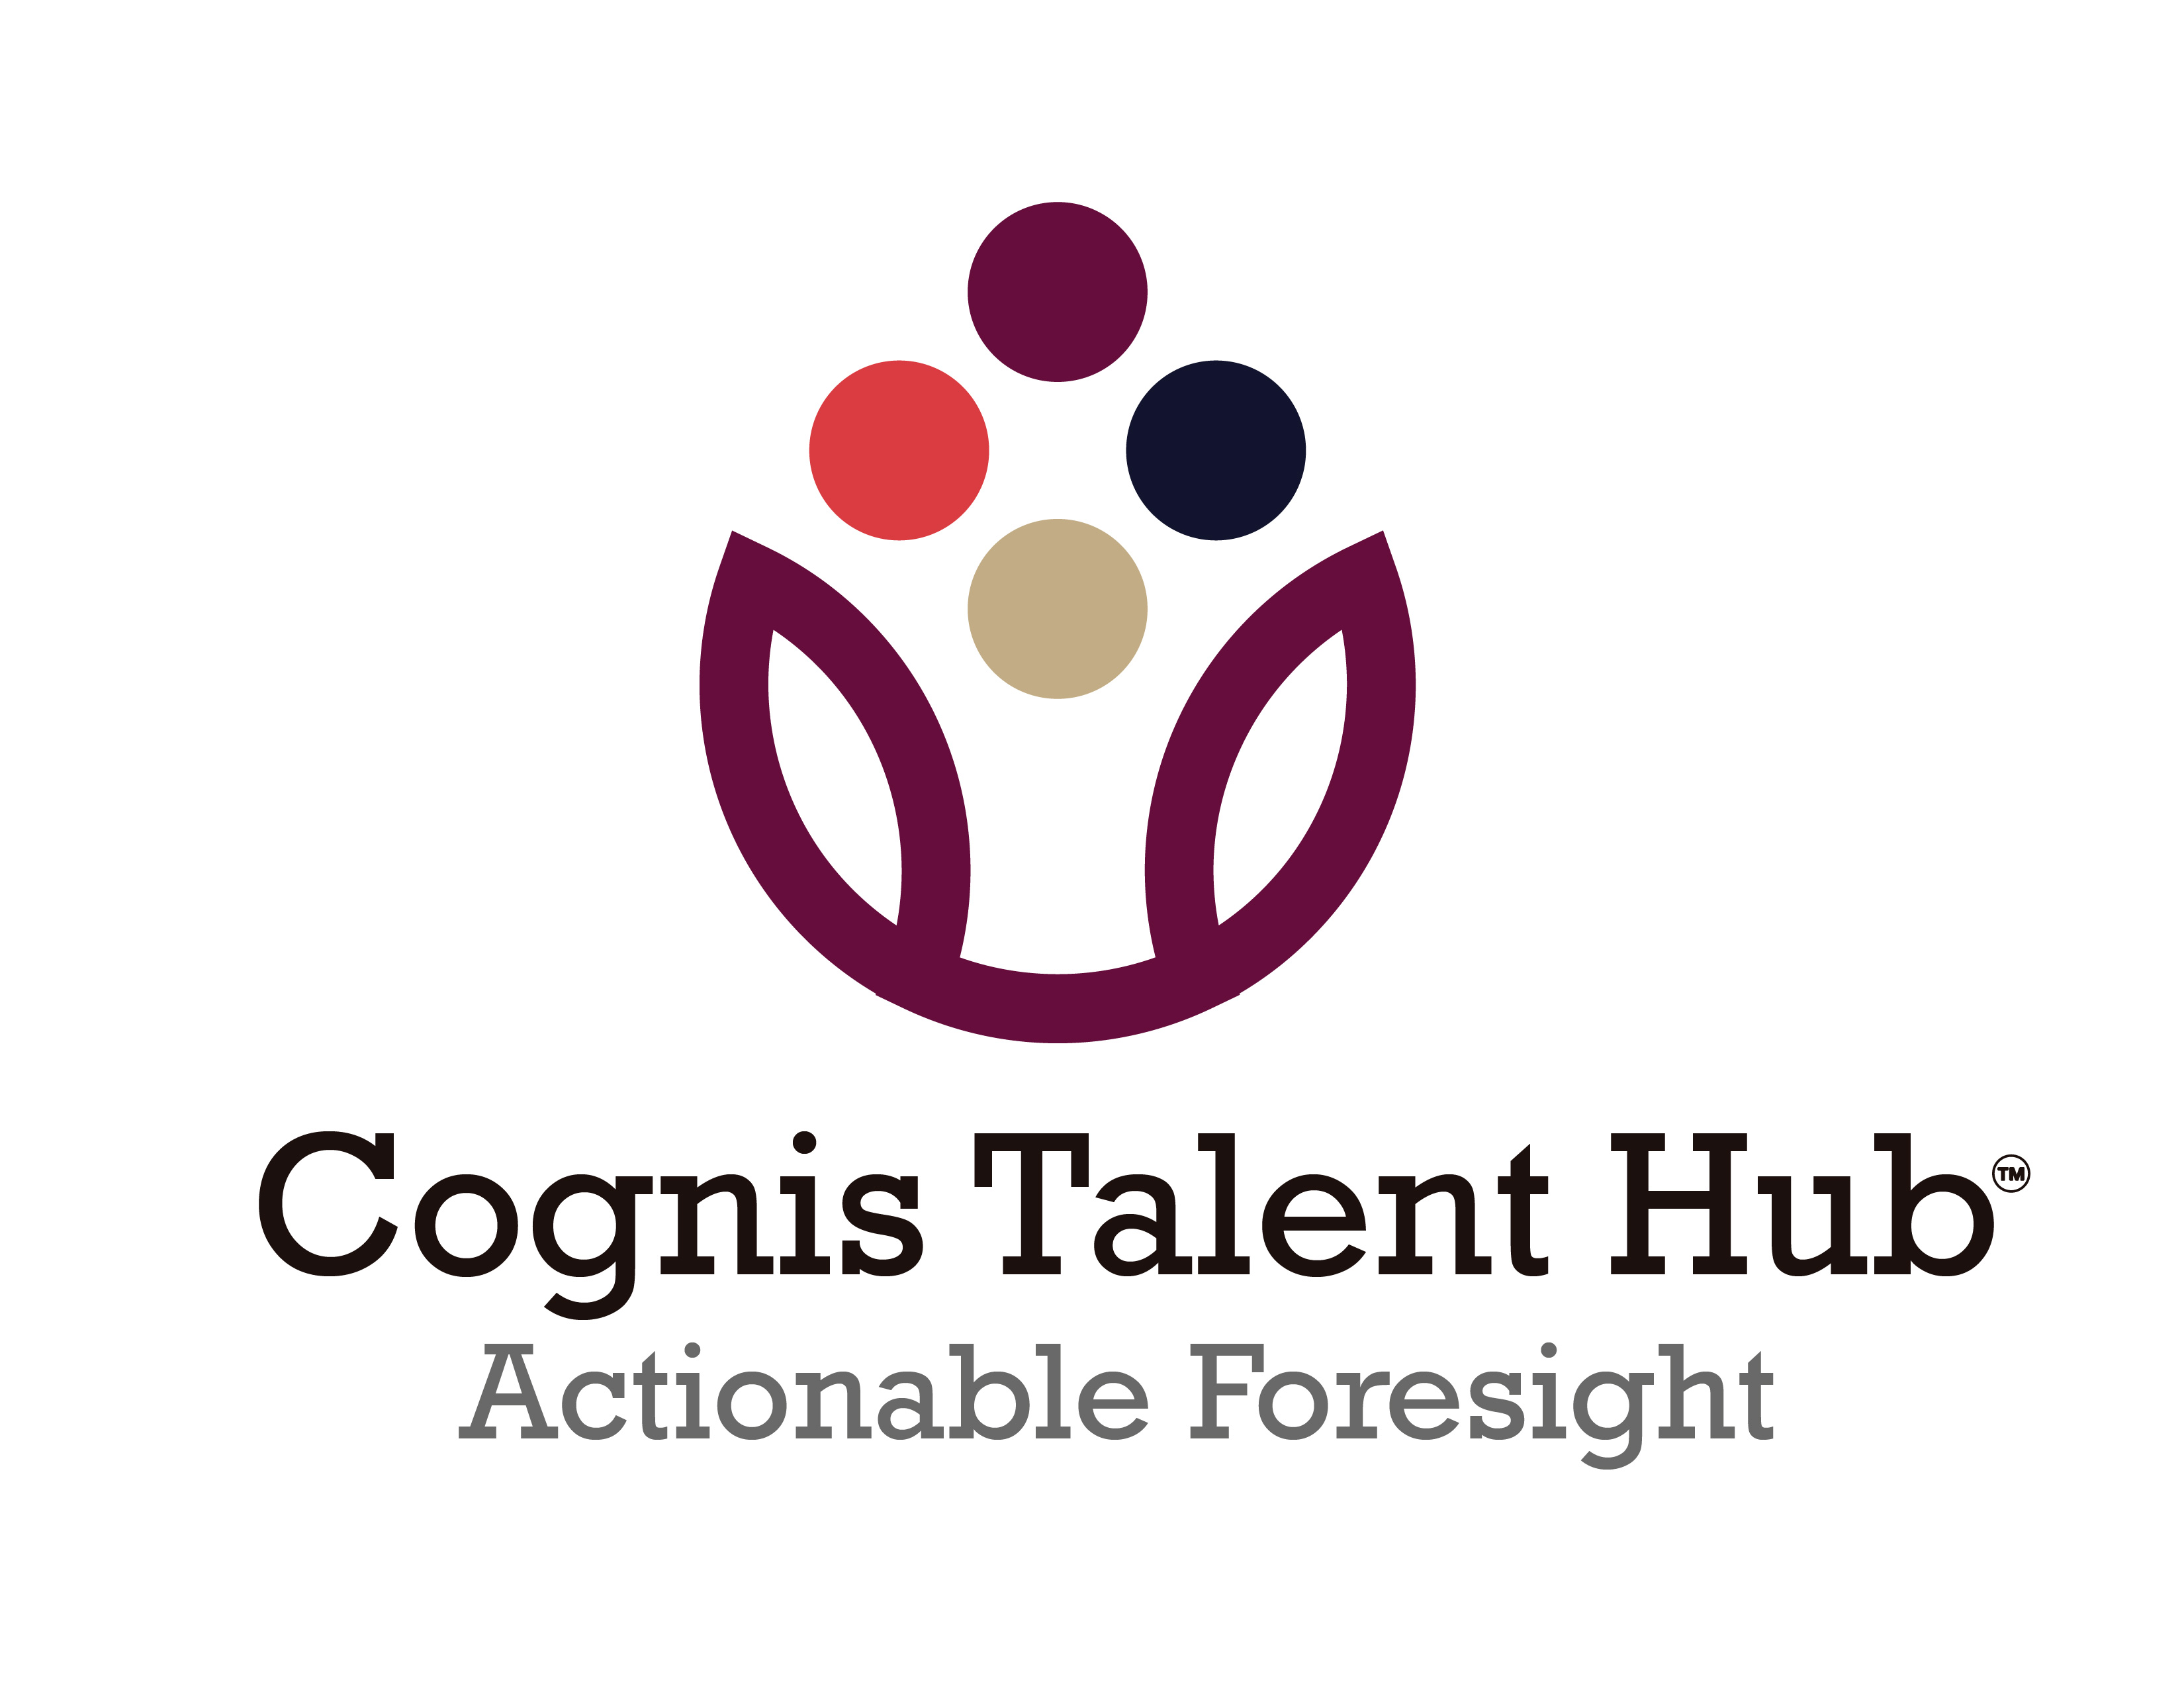 More about Cognis Talent Hub™